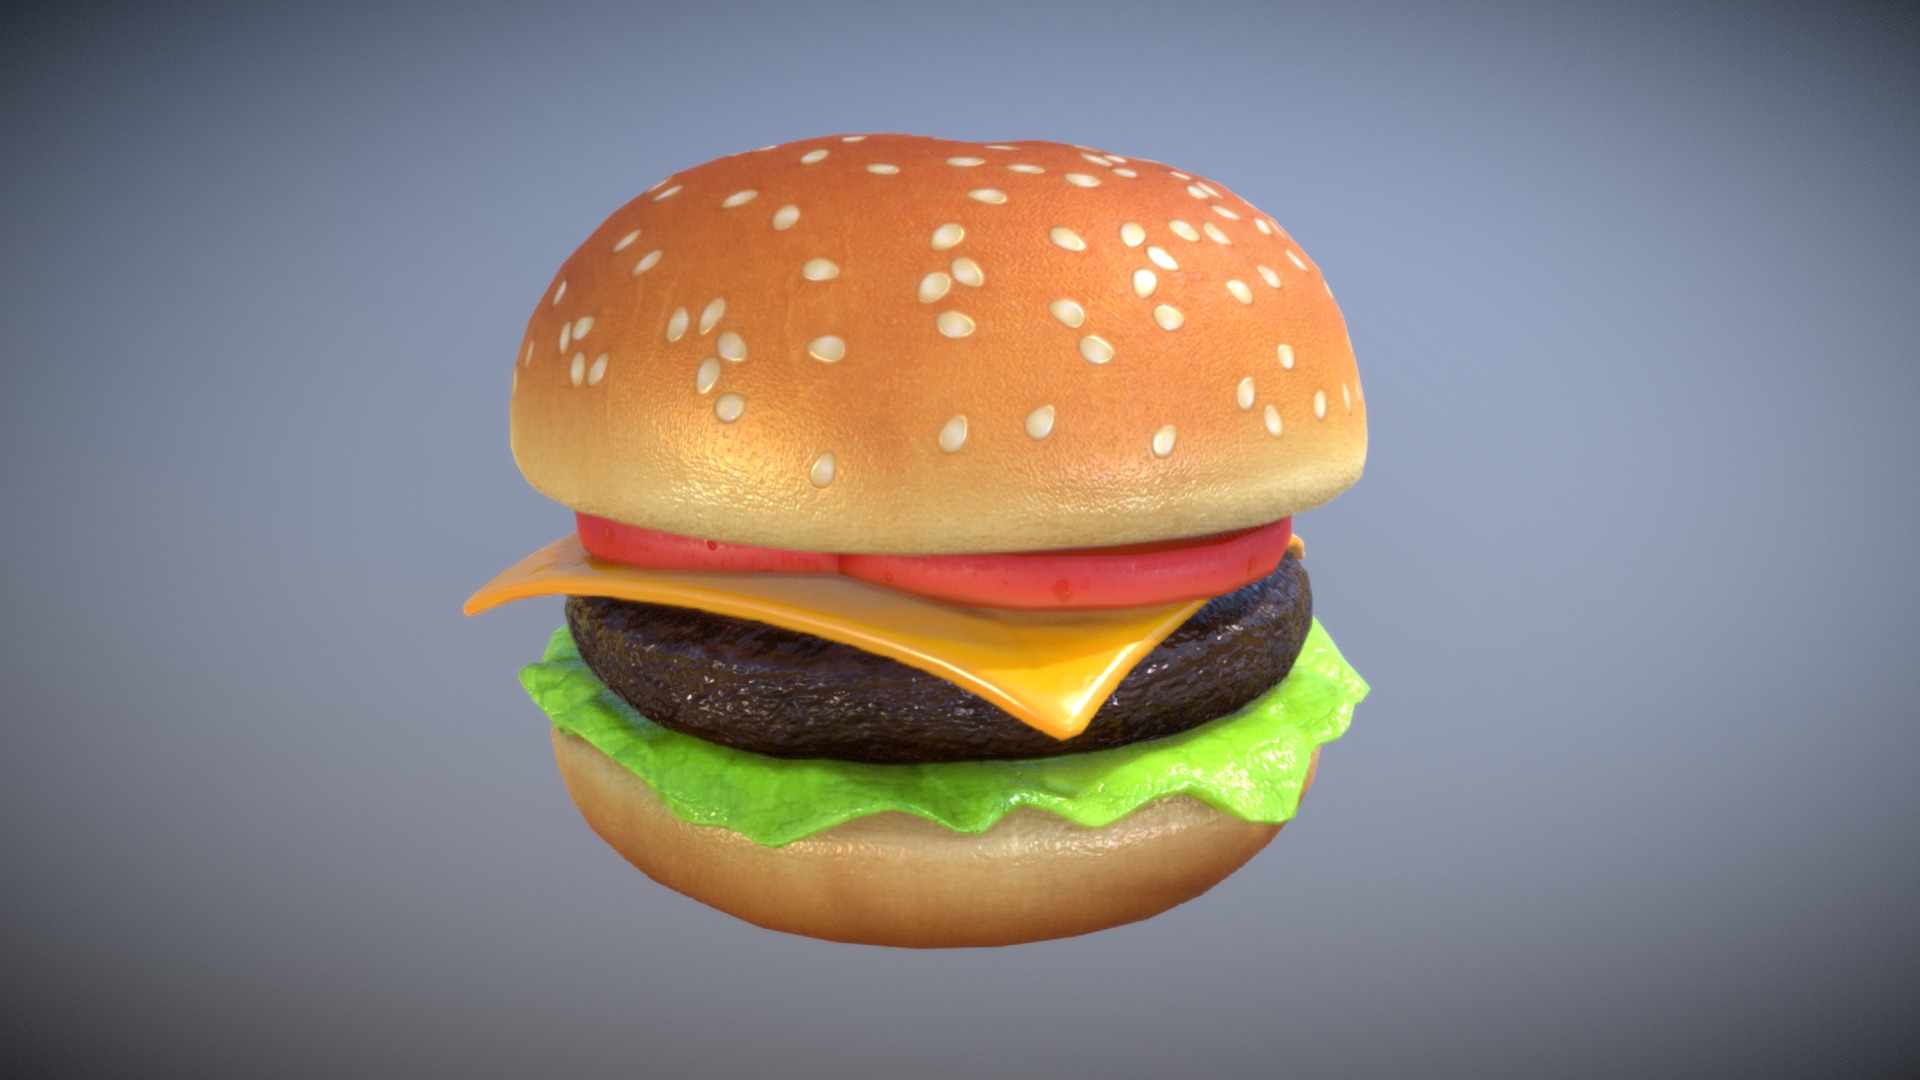 3D model Cartoon Cheeseburger - This is a 3D model of the Cartoon Cheeseburger. The 3D model is about a hamburger with a red and white bun.